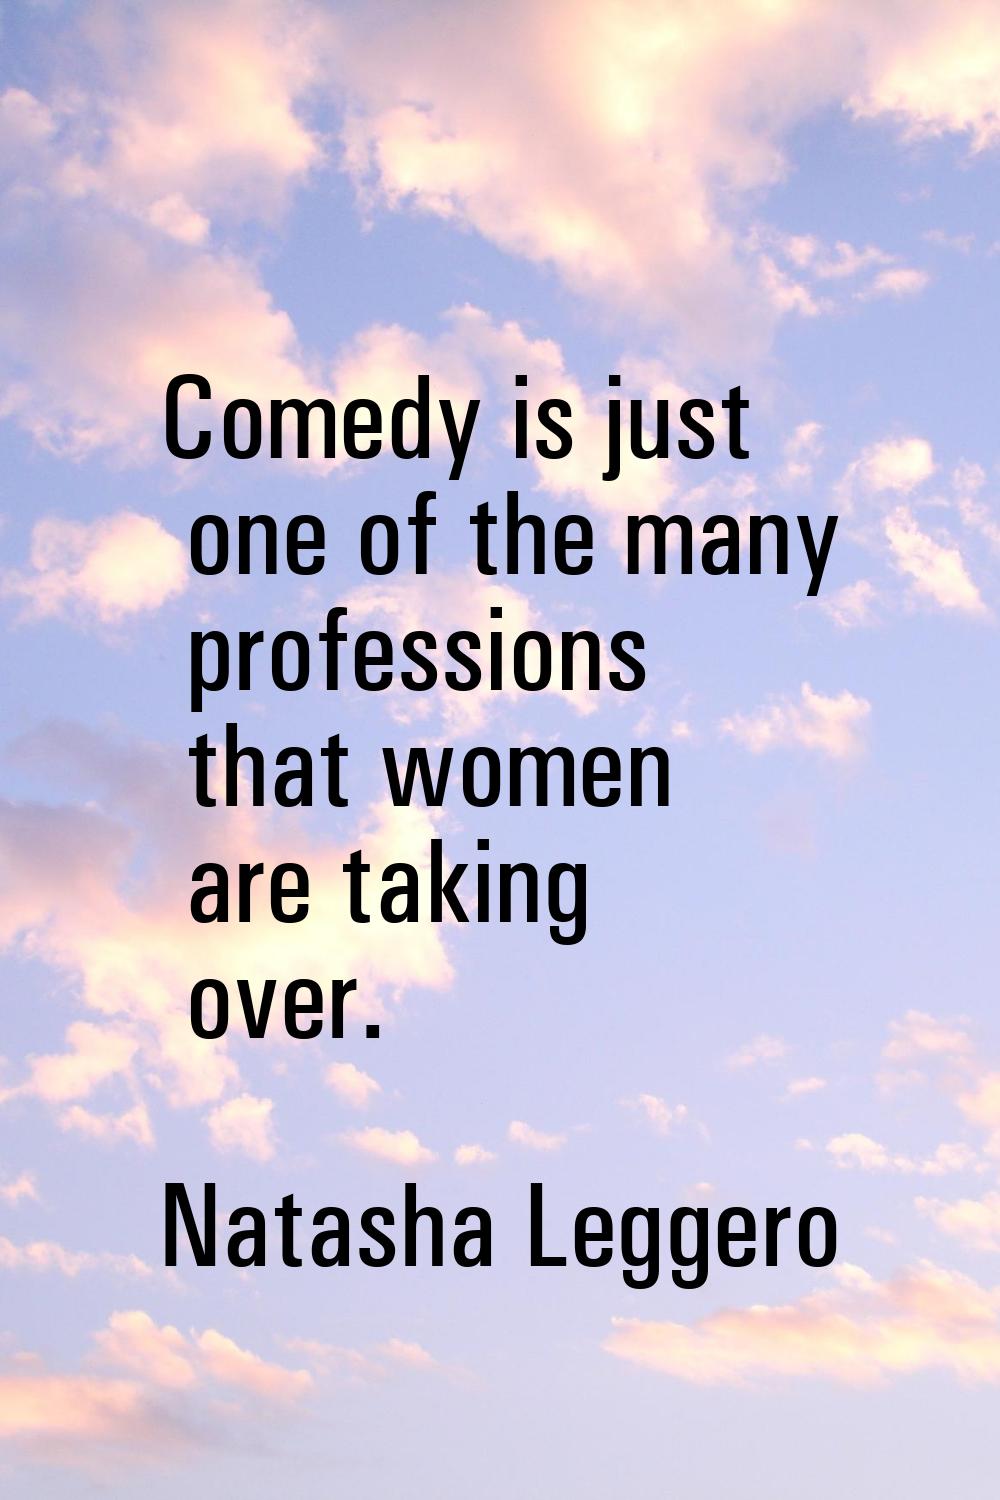 Comedy is just one of the many professions that women are taking over.